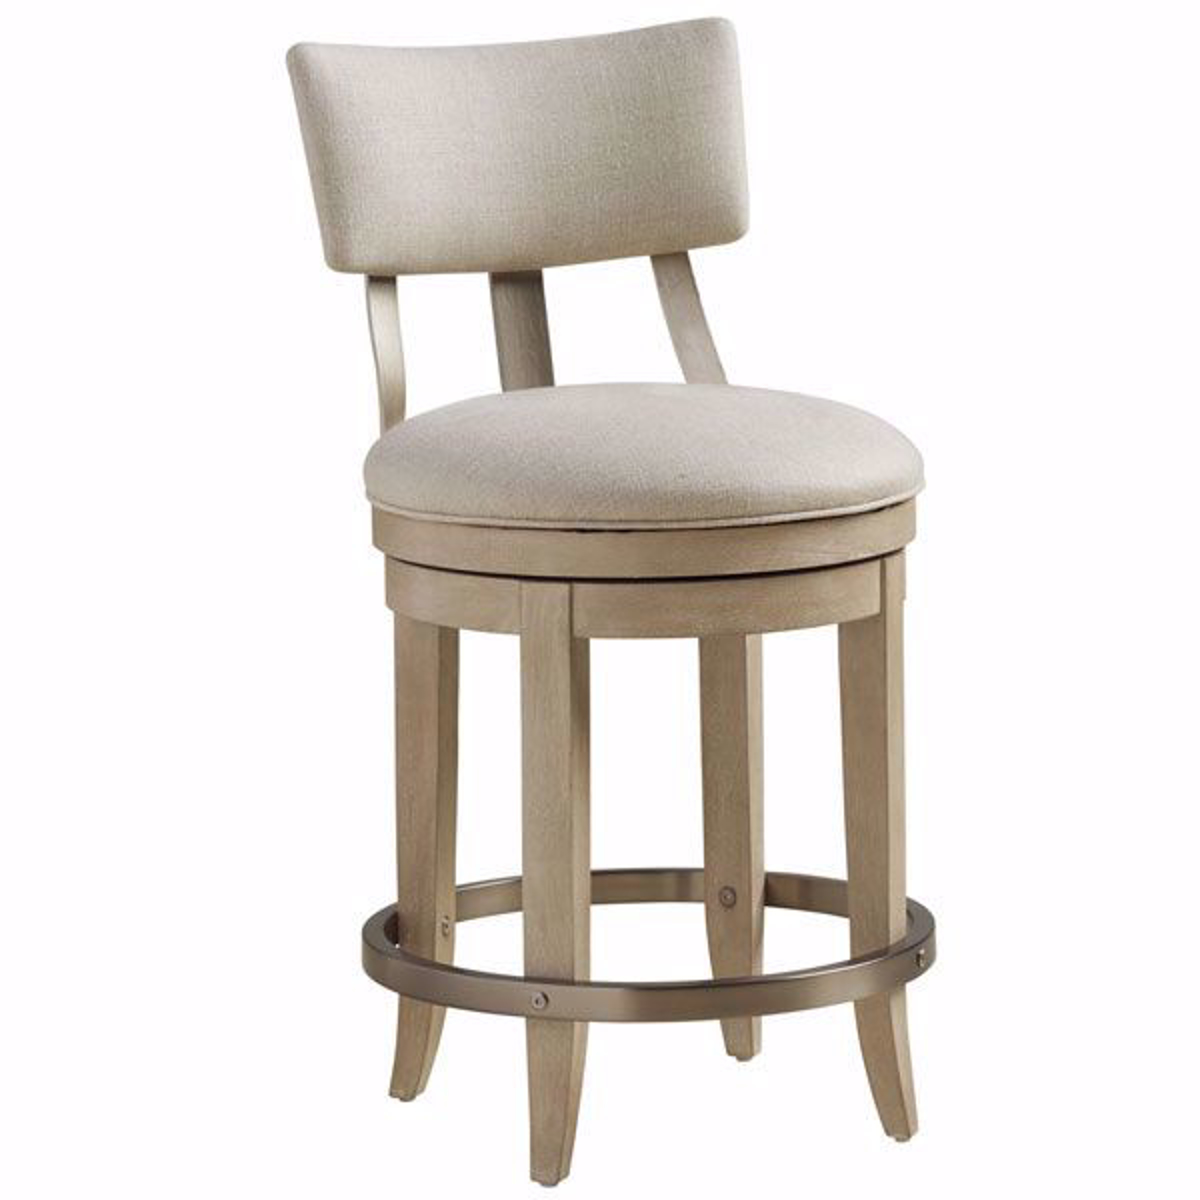 Picture of Cliffside Upholstered Swivel Stool